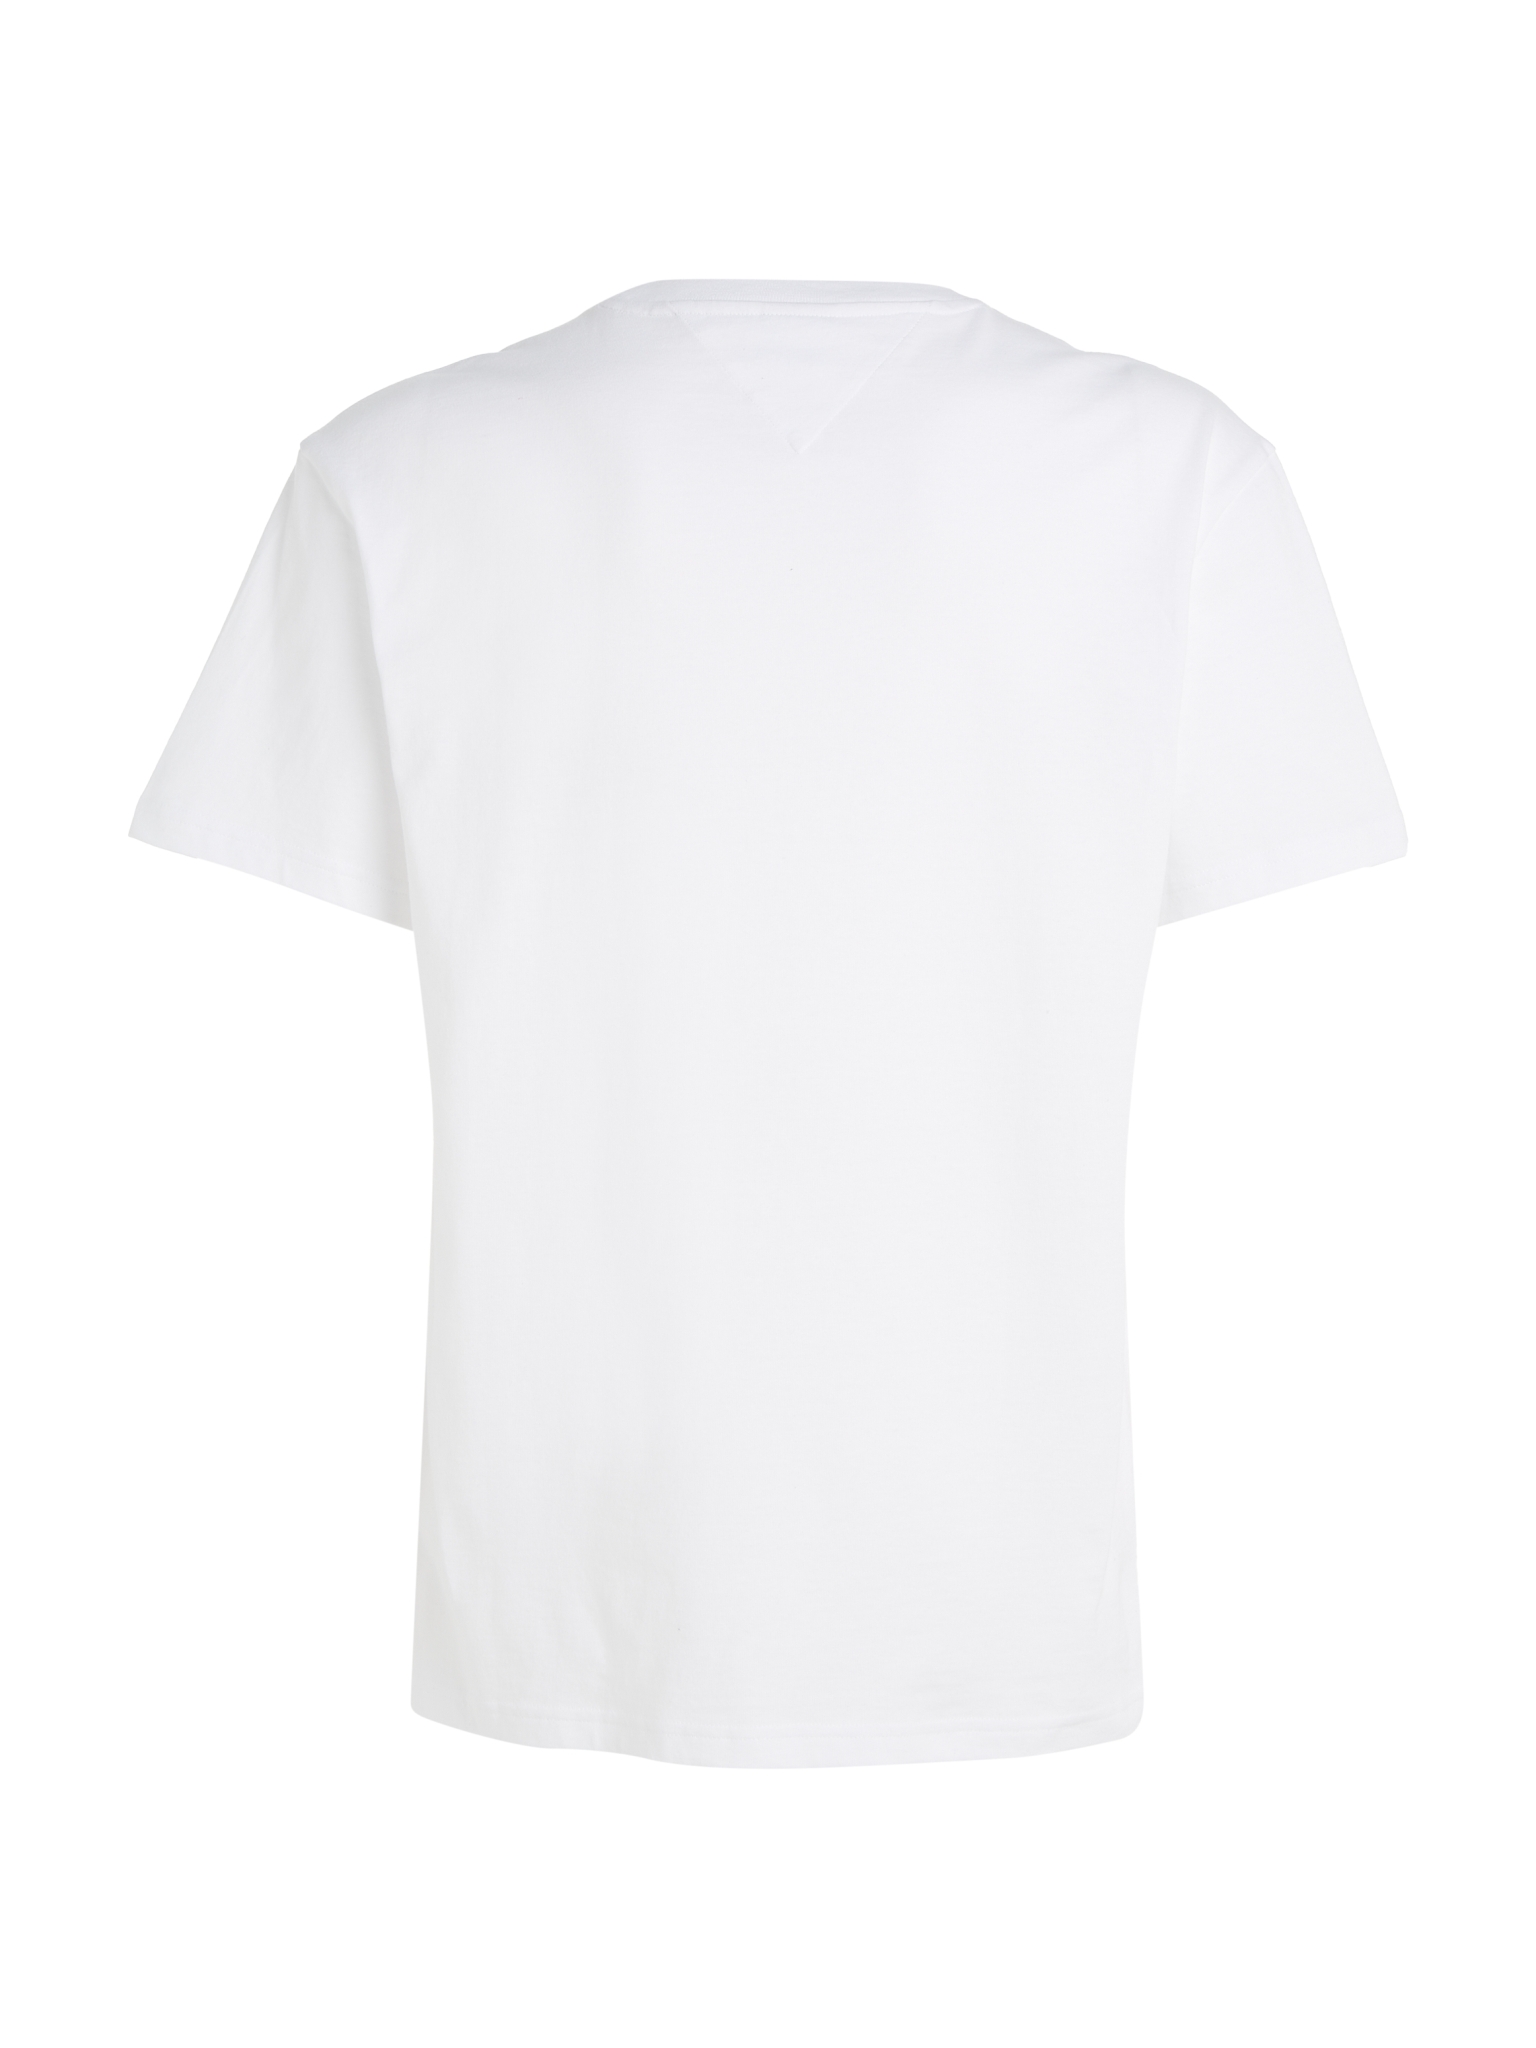 TOMMY JEANS T-Shirt 10716026